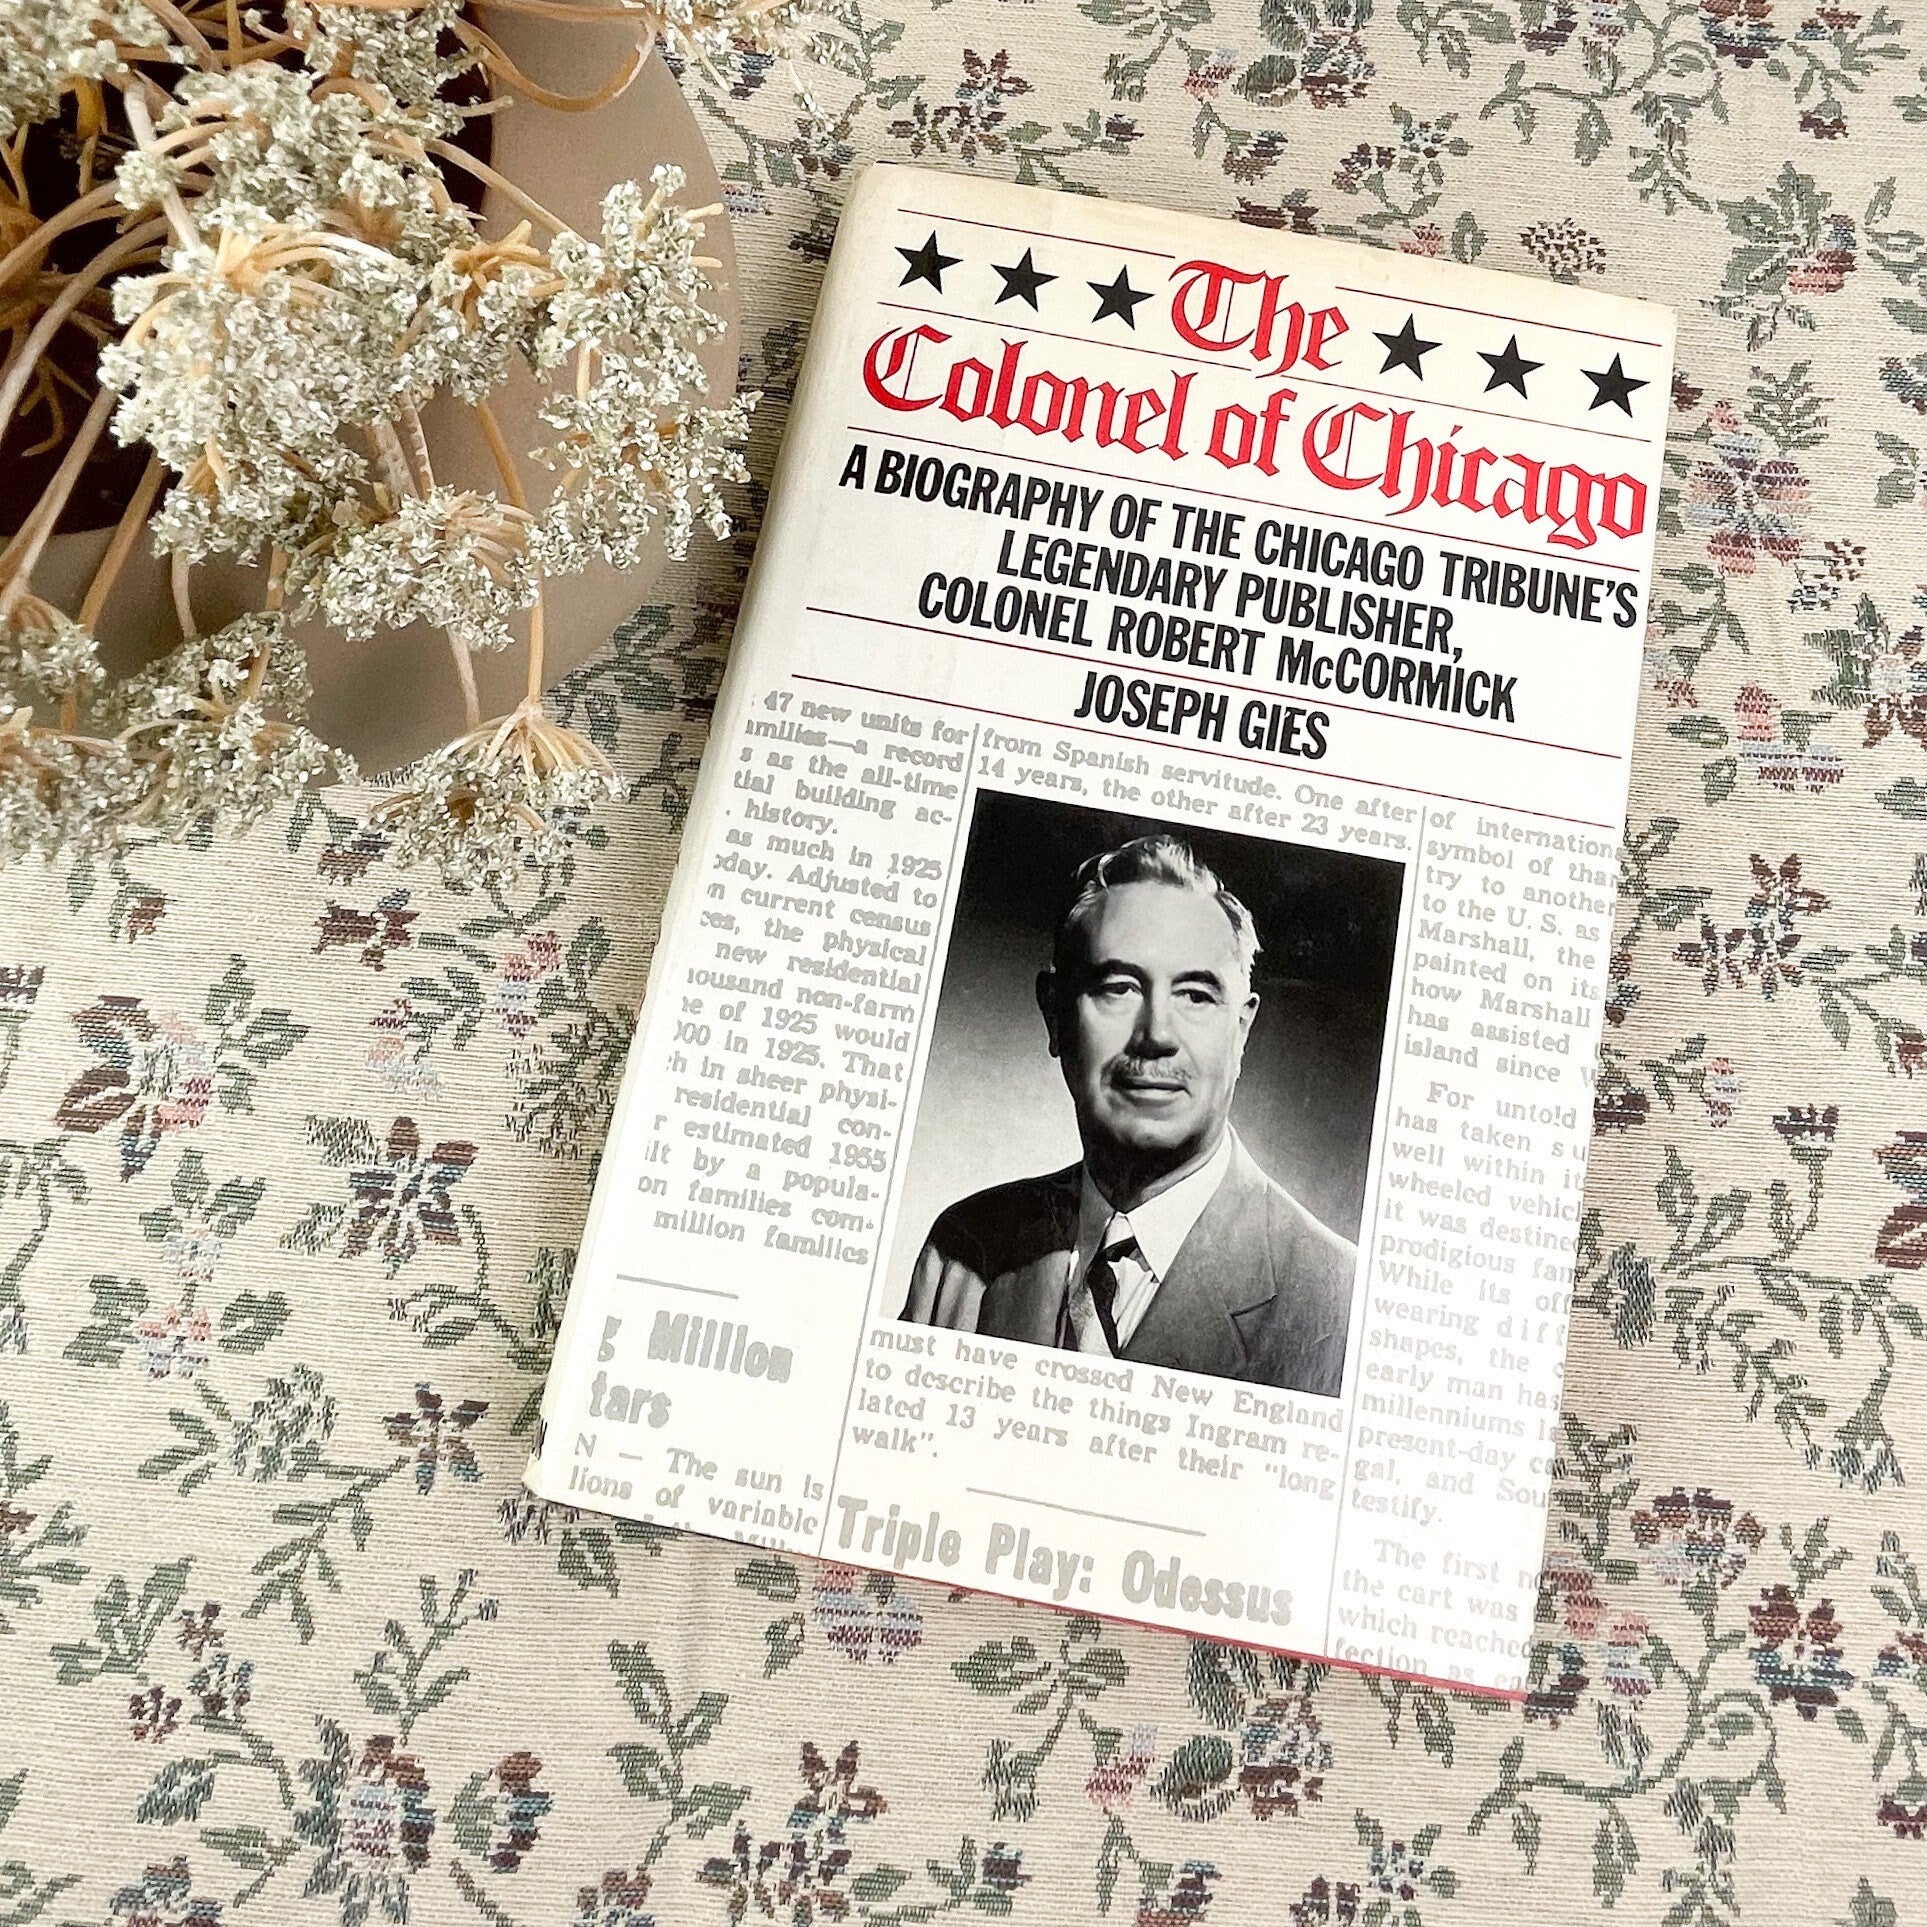 The Colonel of Chicago by Joseph Gies